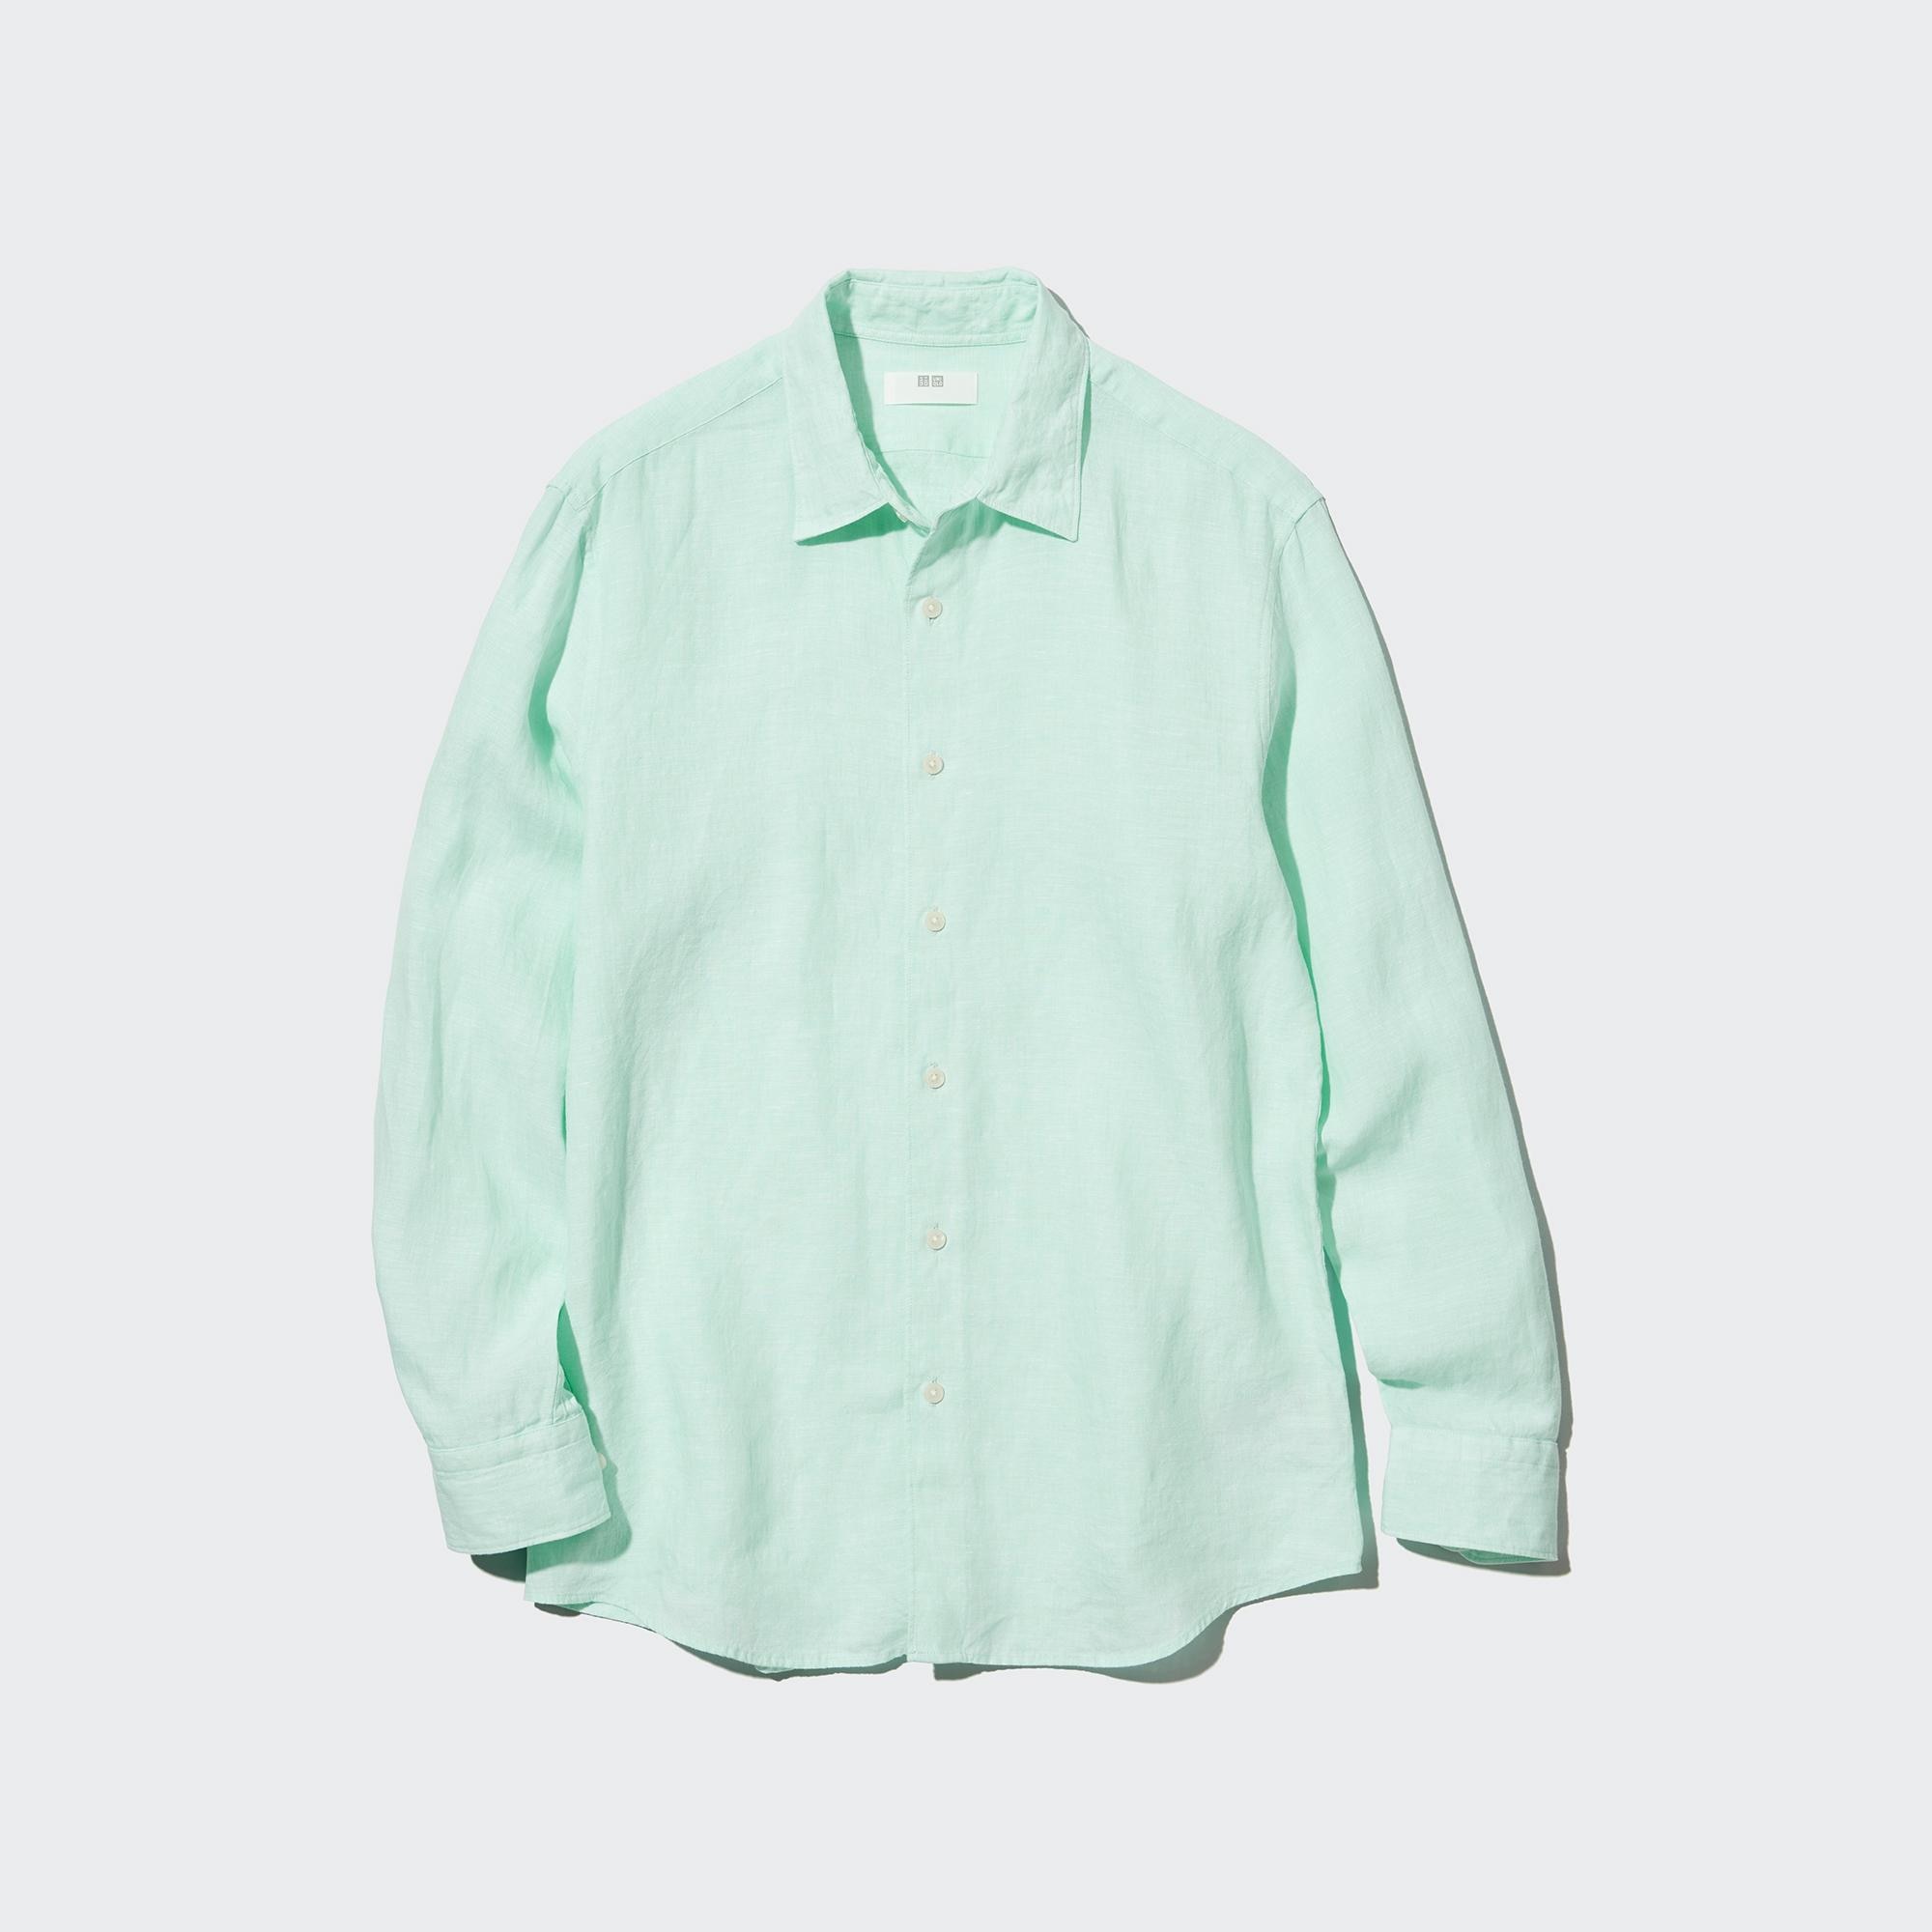 Best untucked mens buttondown shirts according to style experts